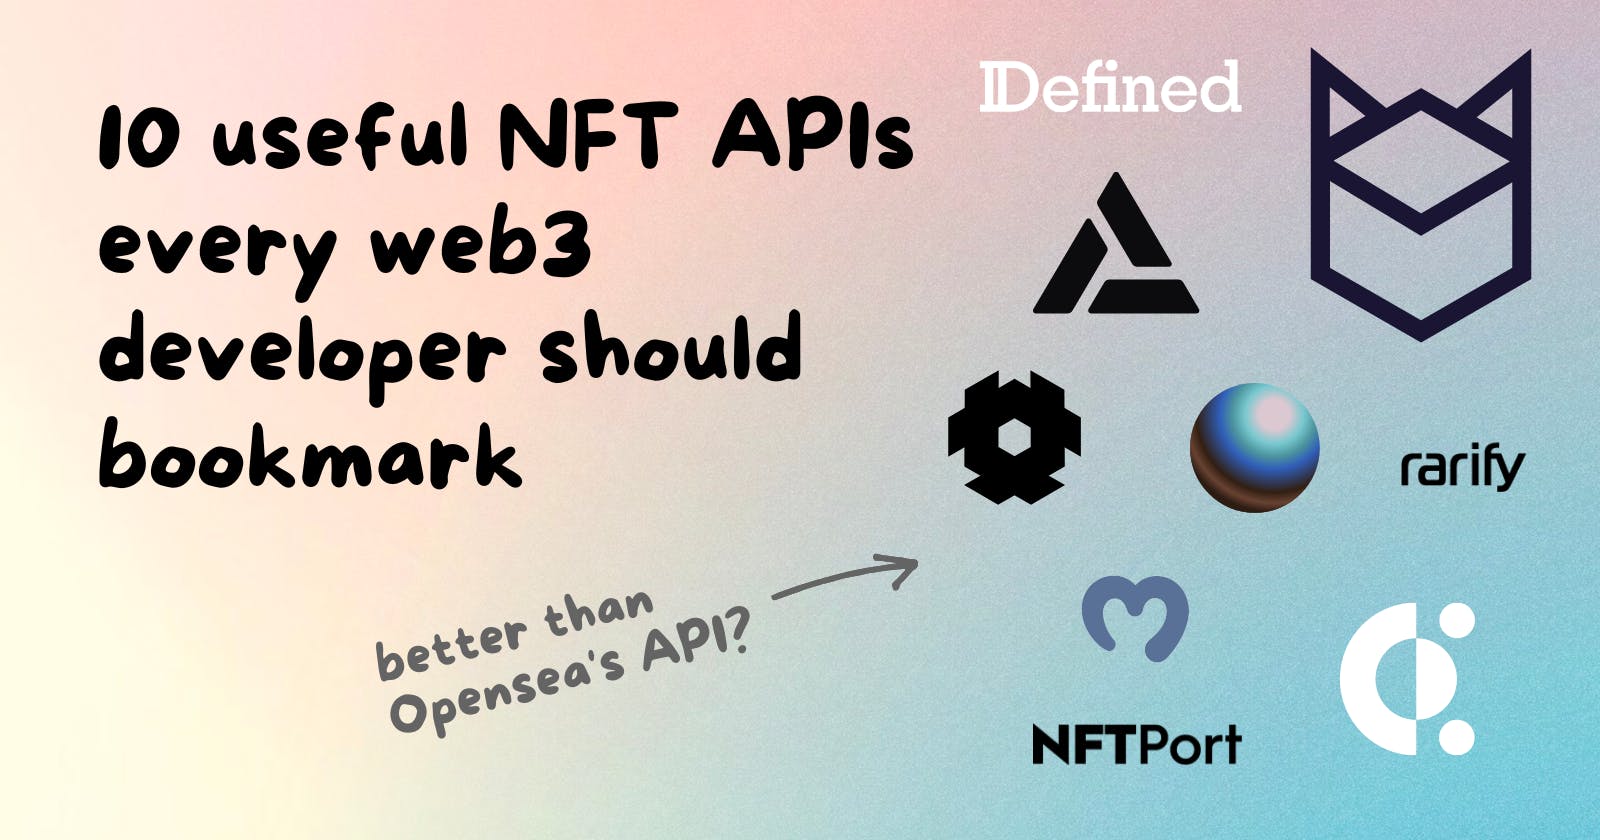 10 useful NFT APIs every web3 developer should bookmark for their next NFT project